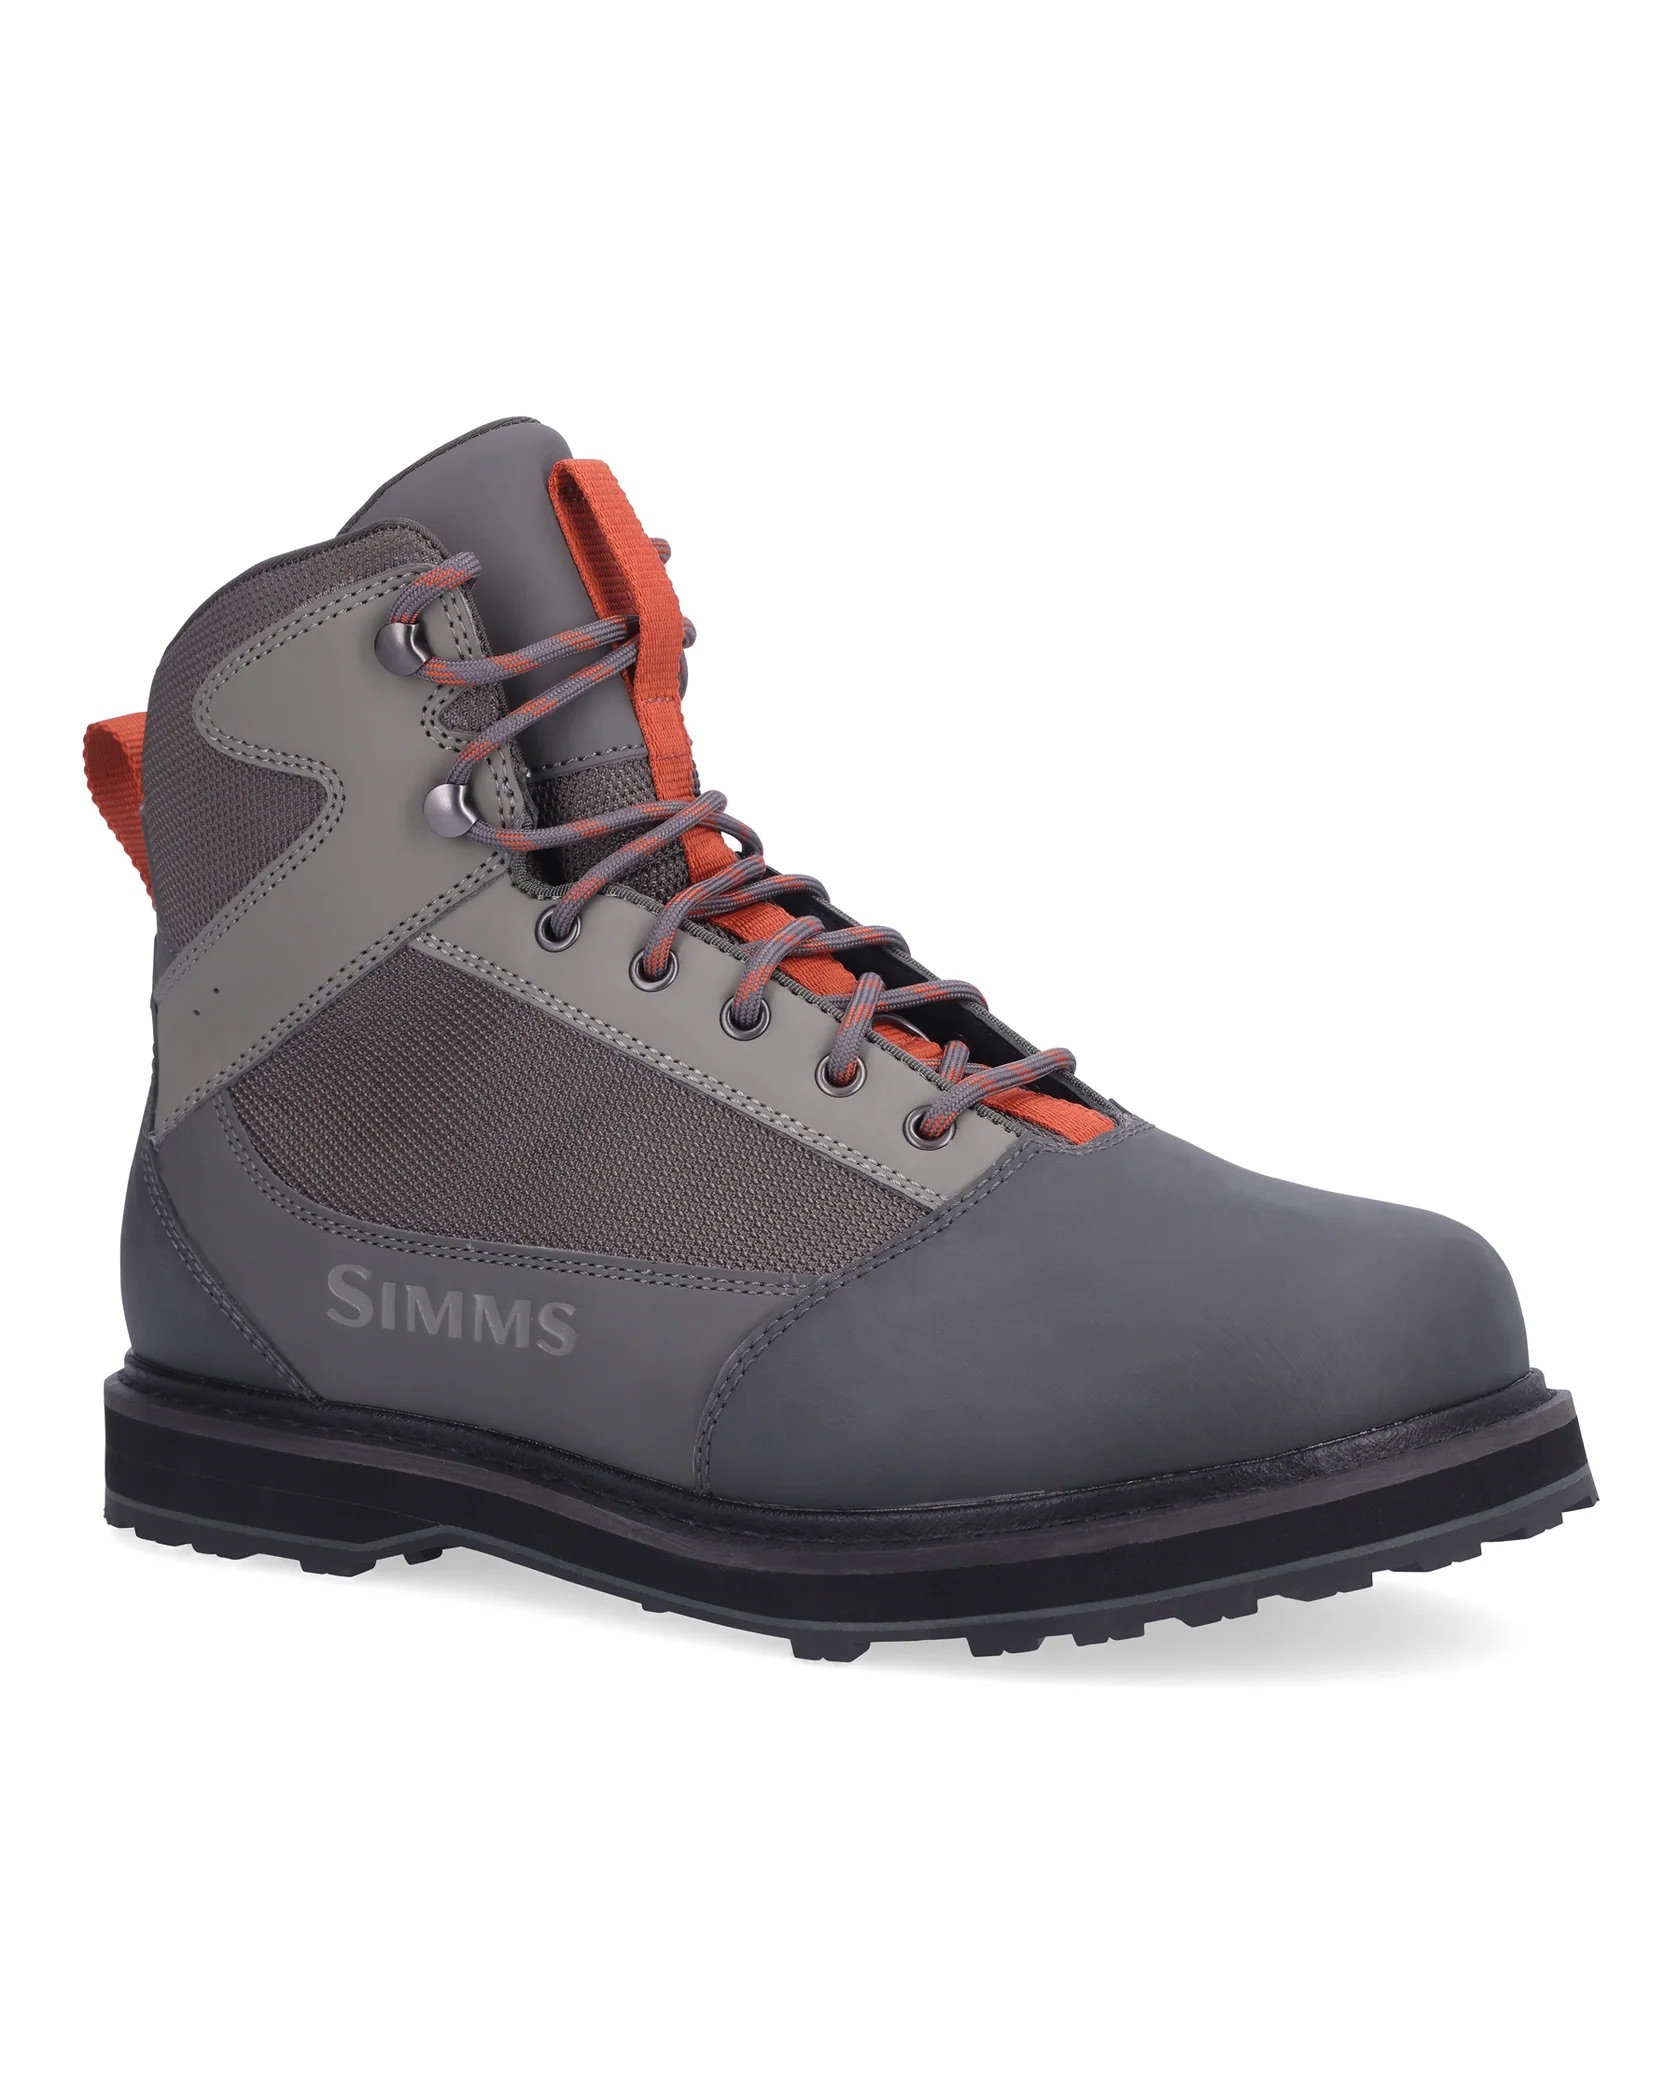 Simms Tributary Wading Boot - Rubber - Size 7